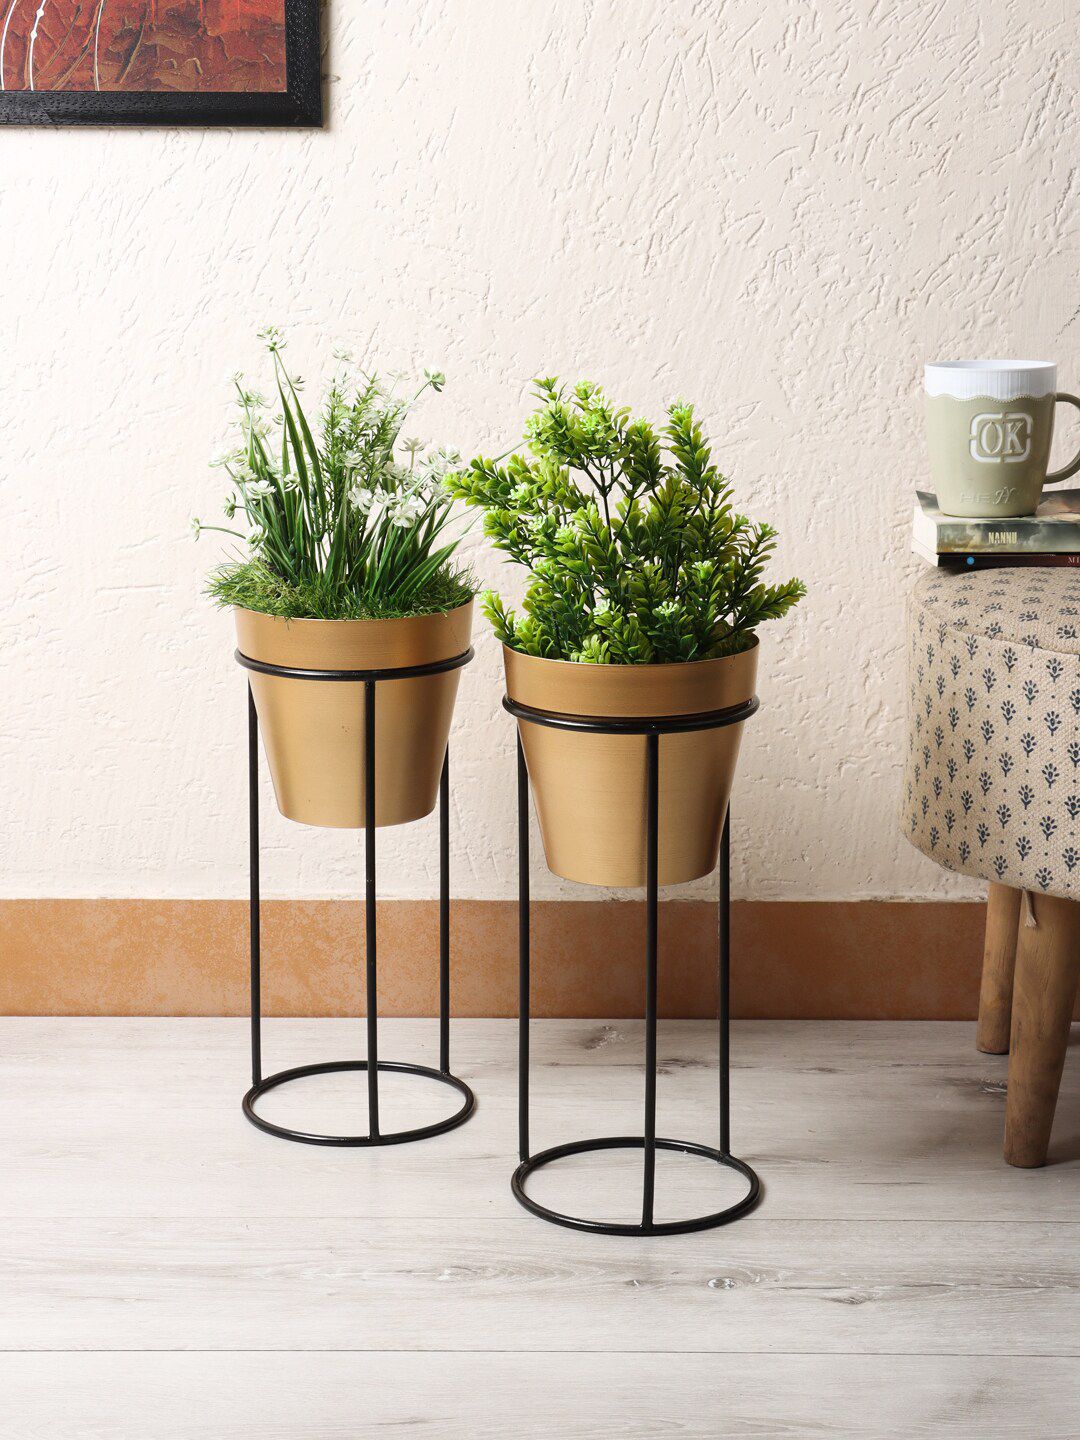 Amaya Decors Pack Of 2 Gold-Toned & Black Solid Planters With Stand Price in India